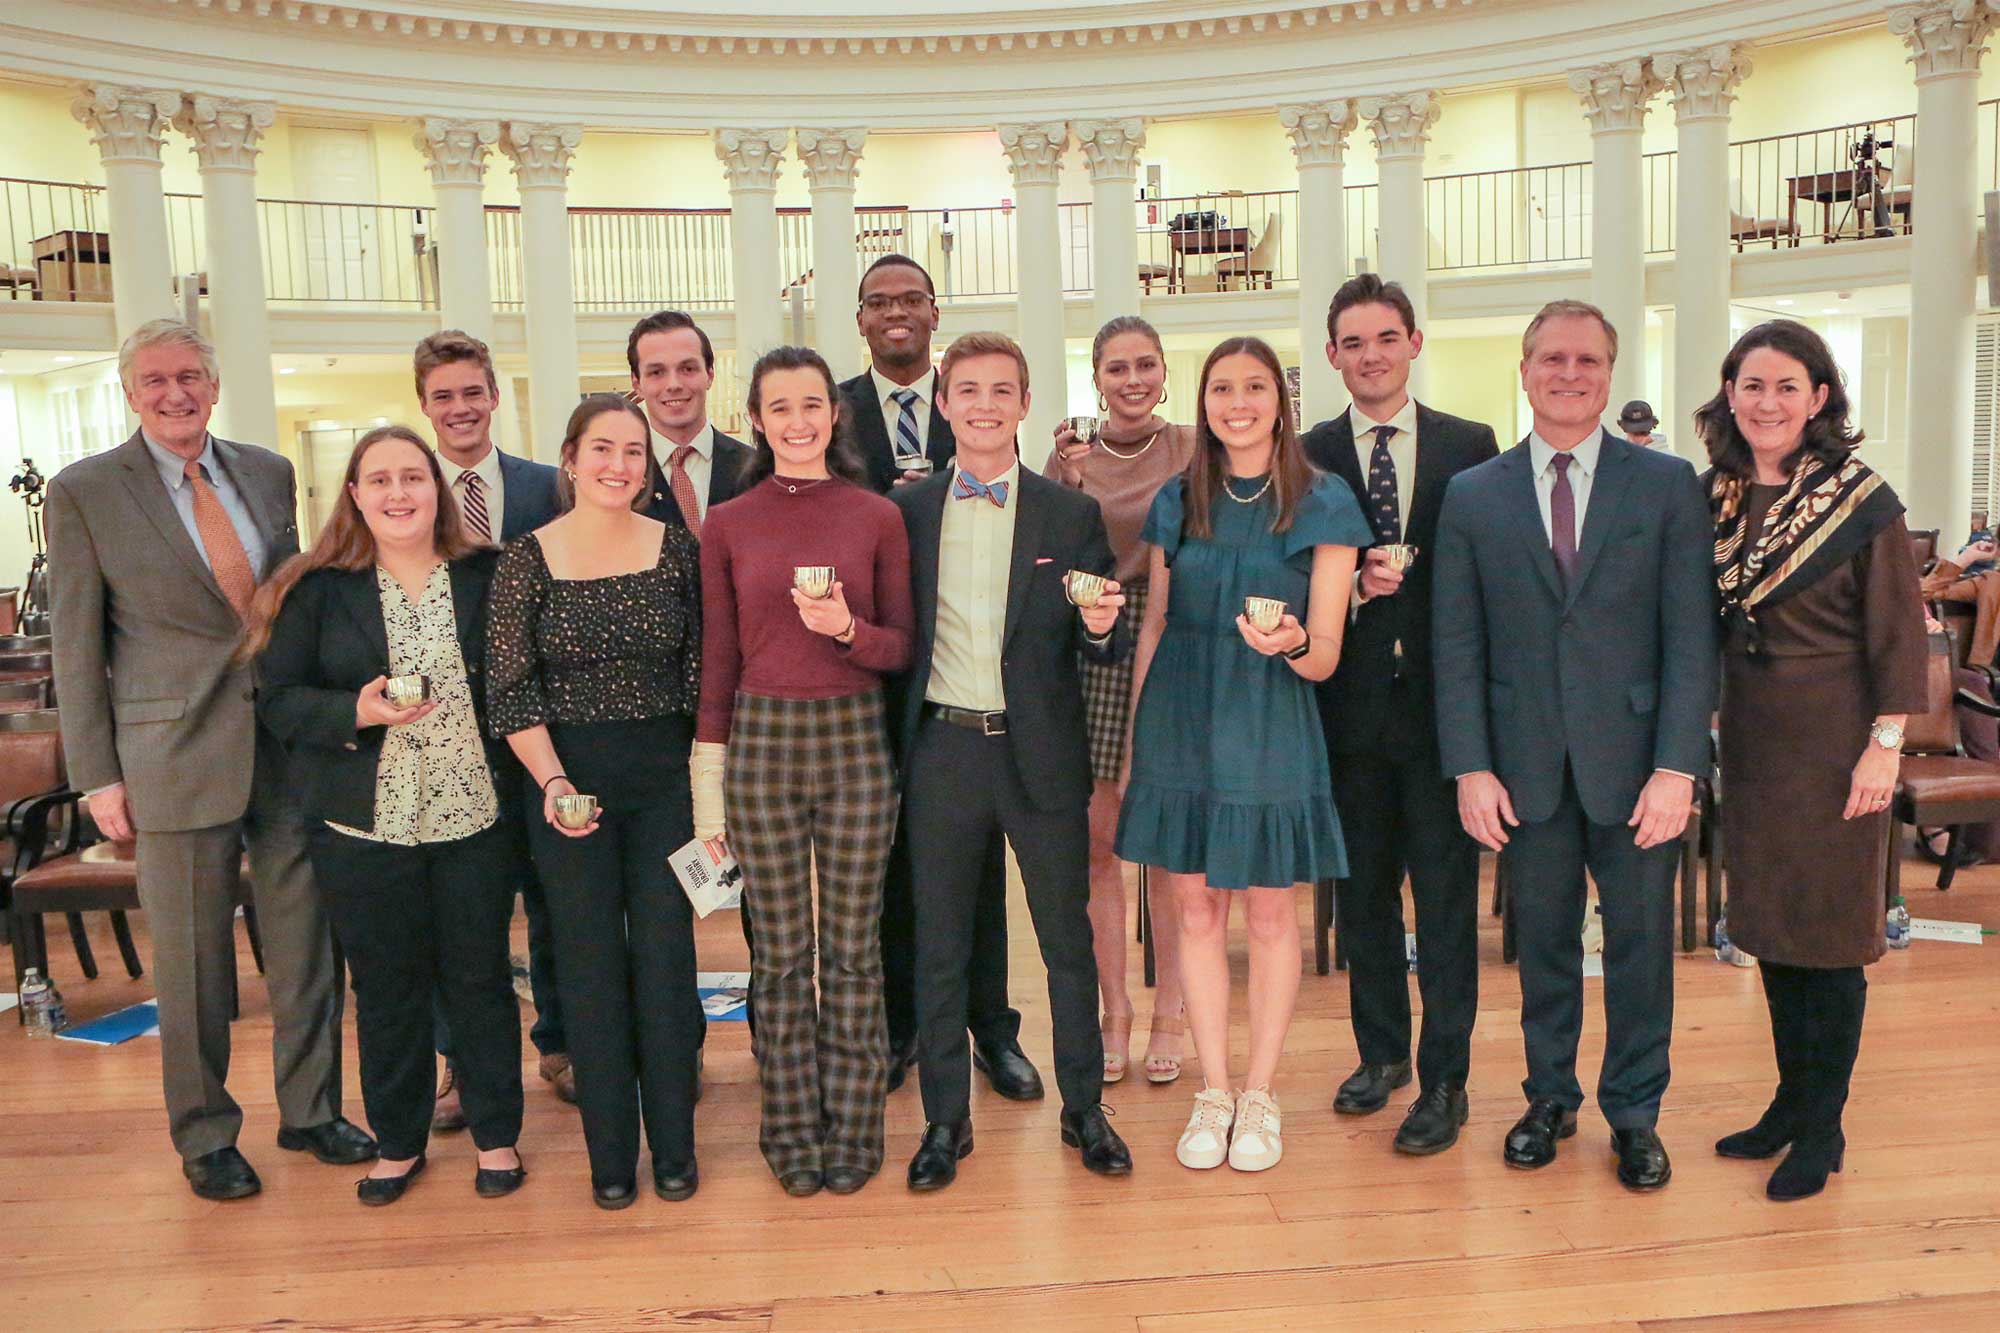 Group photo of the Oratory Content Group holding cups and smiling at the camera